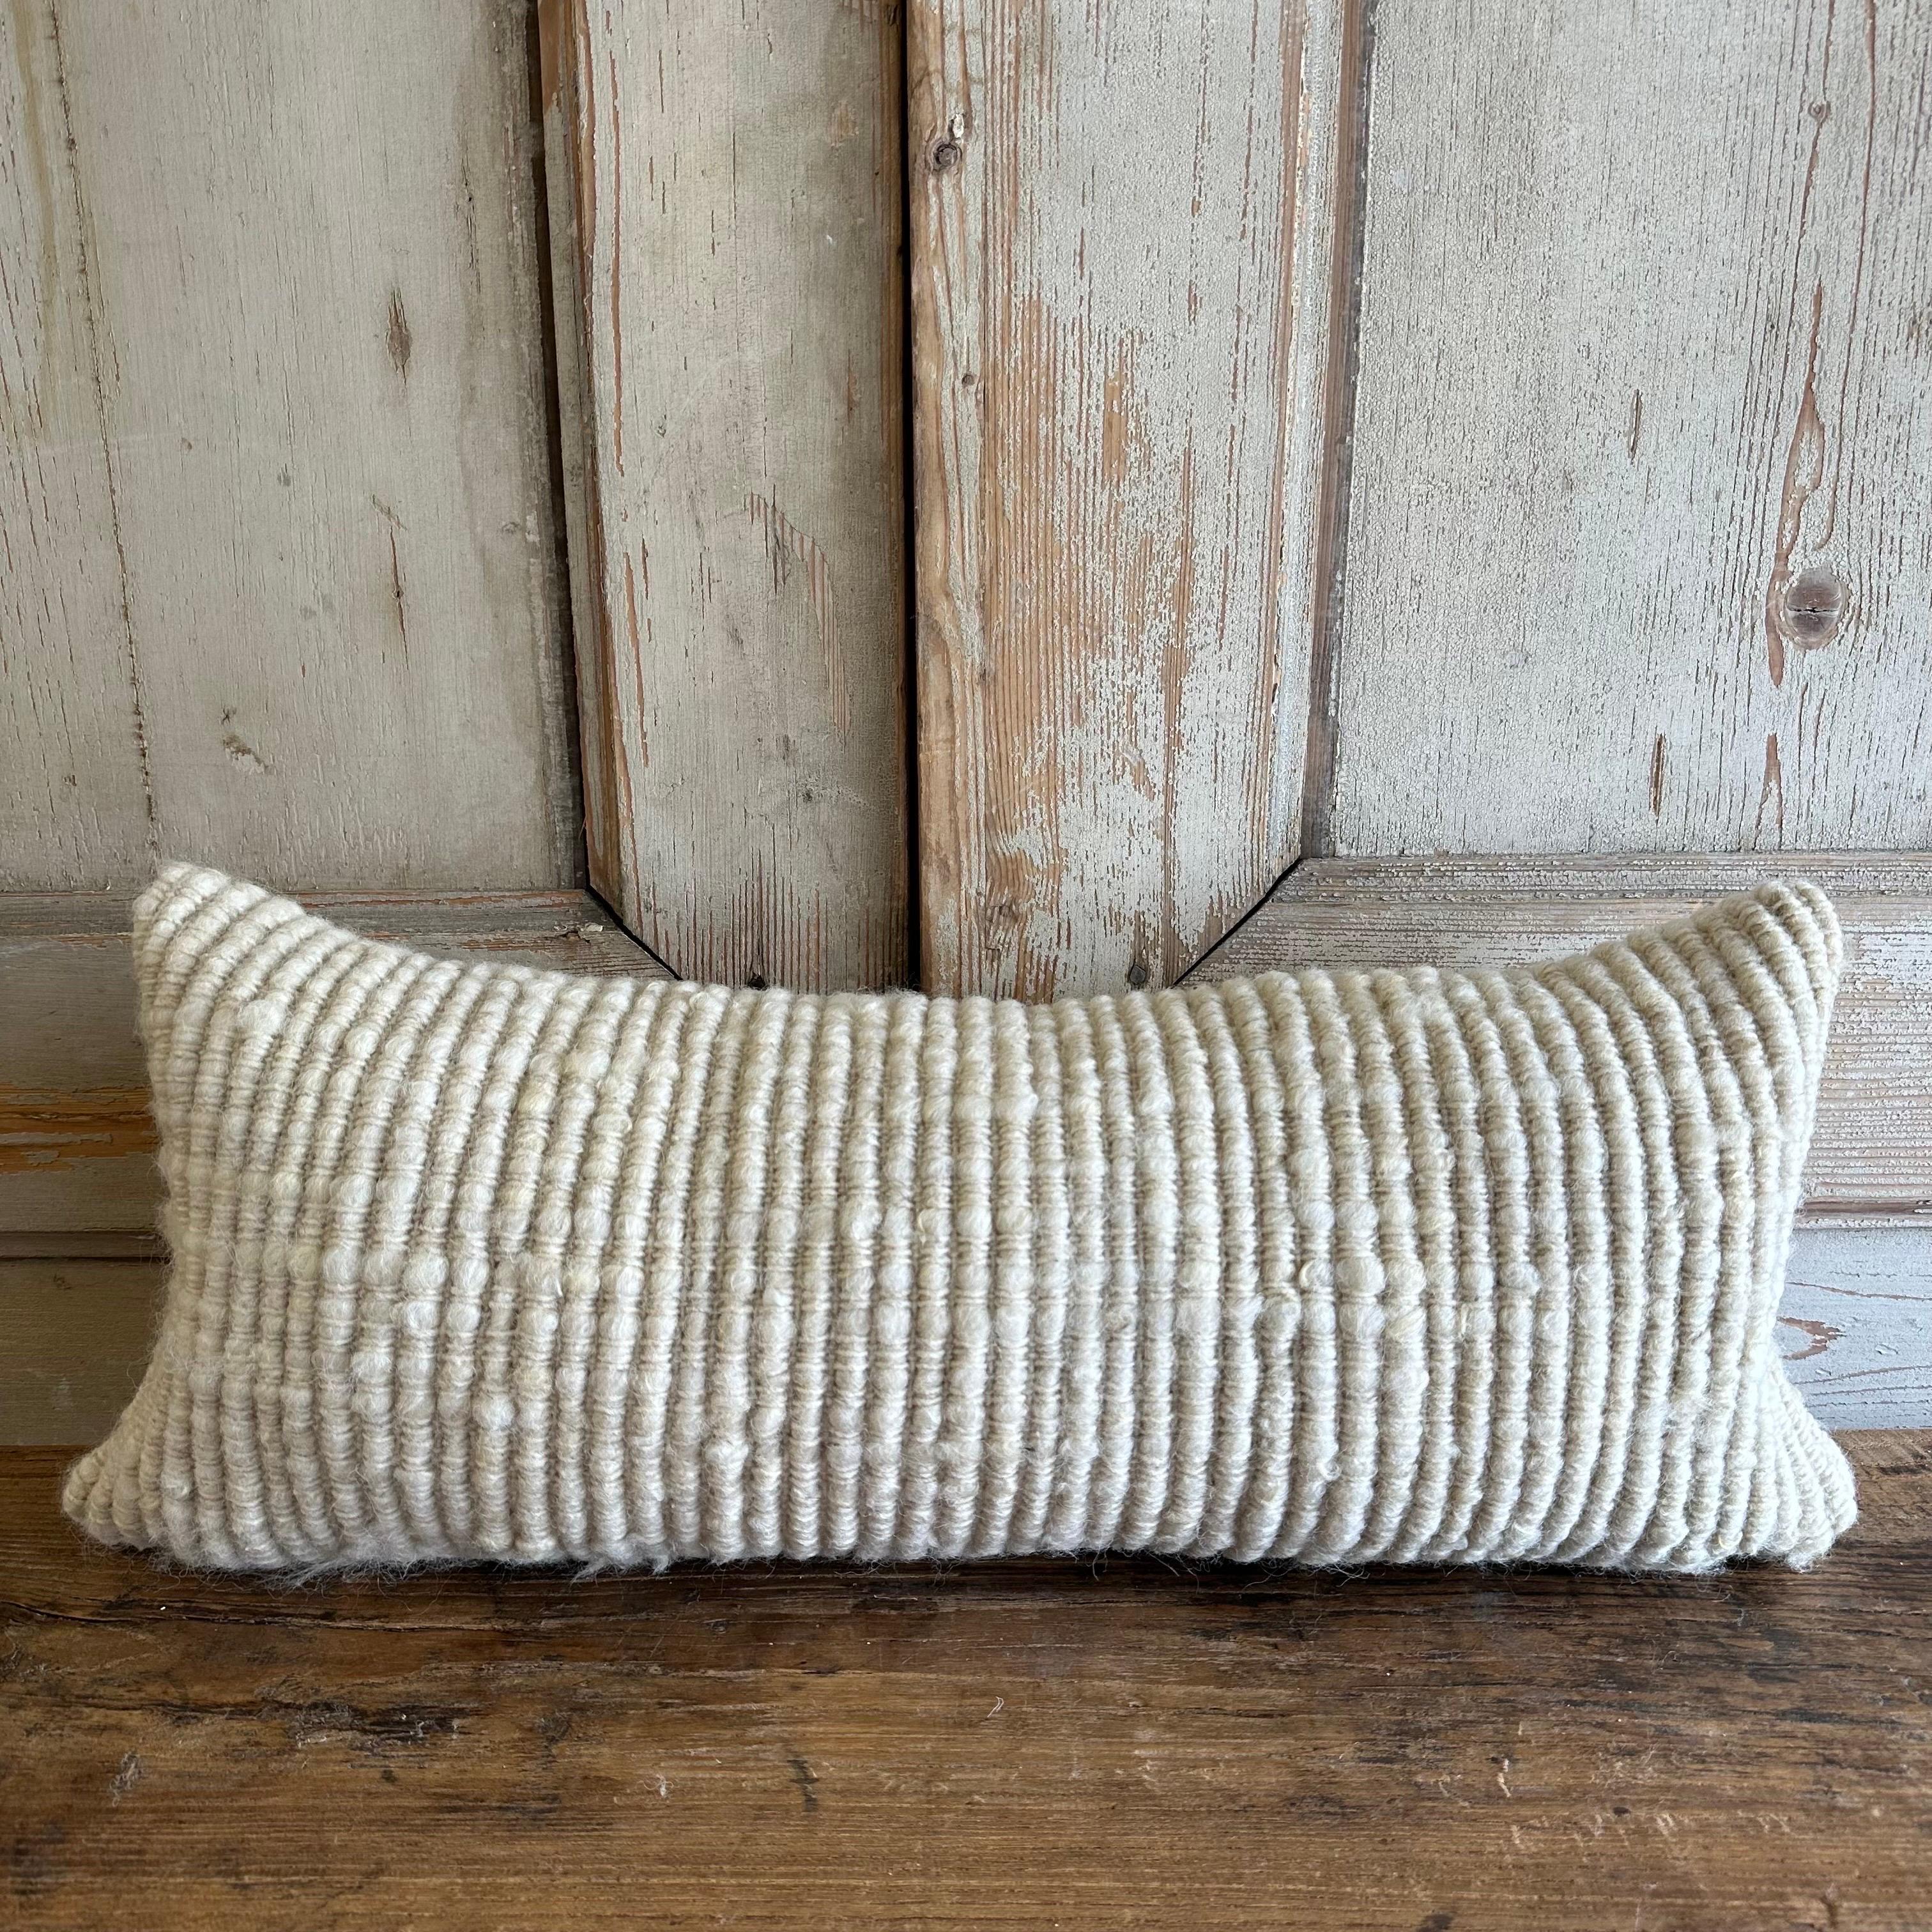 Organic Wool Handmade Pillow
All of our products are commissioned and handmade by the craftswomen of Chiloé. The textiles are made with 100% wool from ’Chilota’ sheep, that are born and raised on the island.?The process by which these luxurious